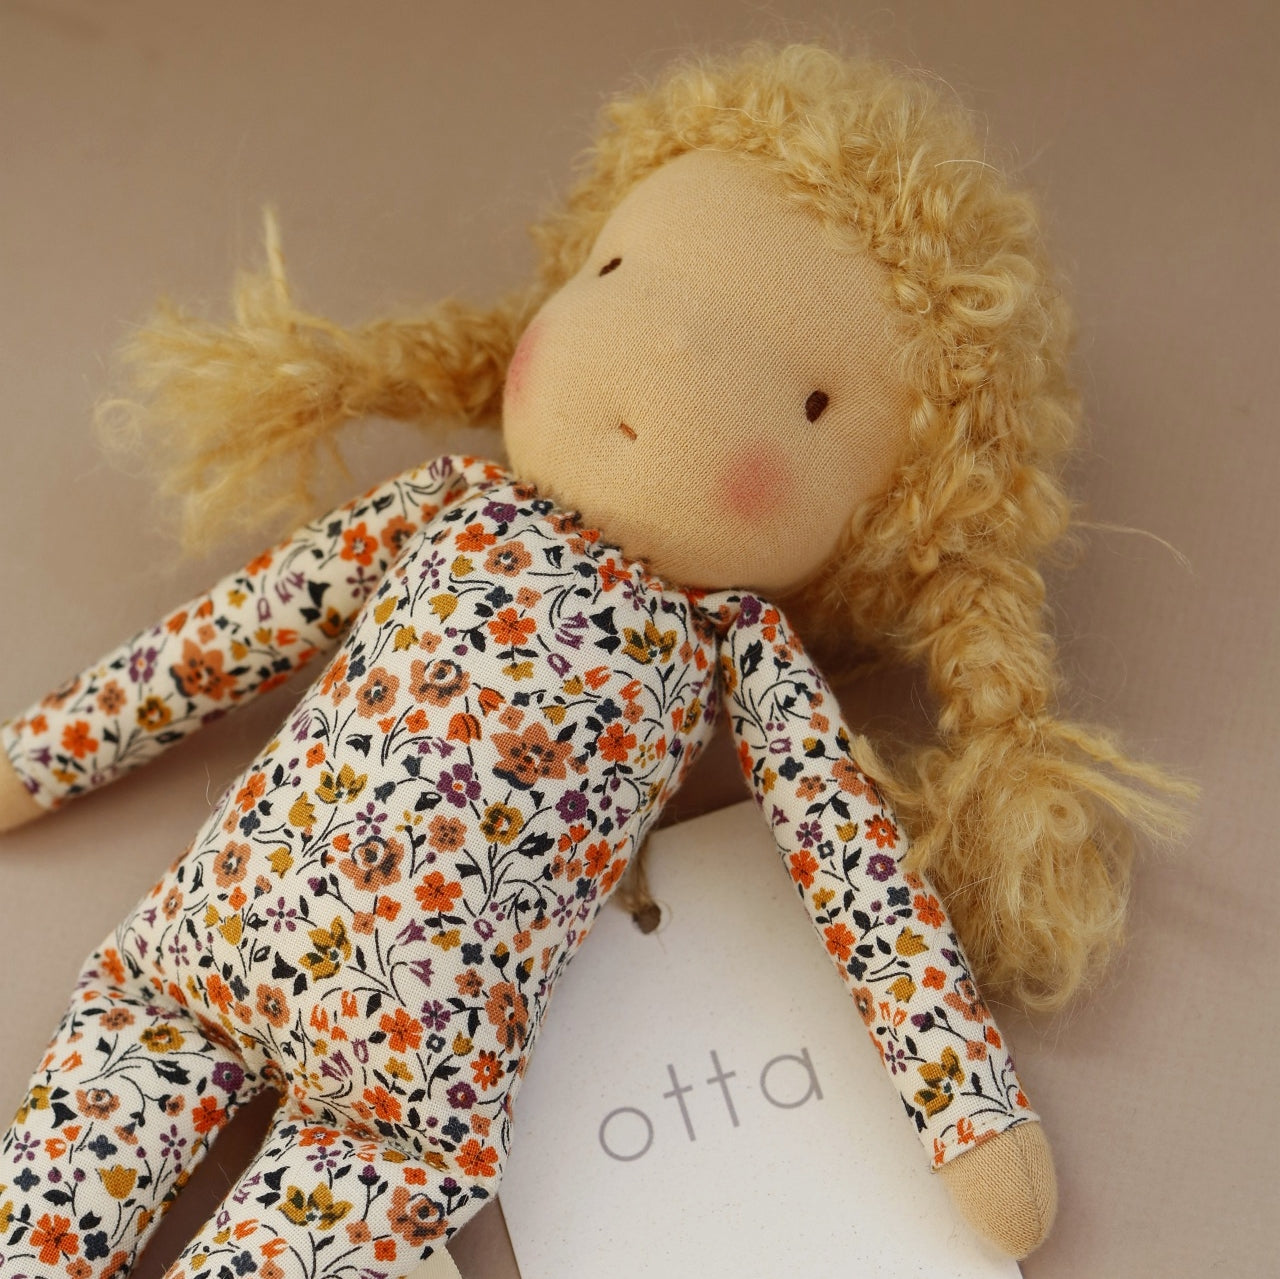 Otta Doll “Middle Sister"